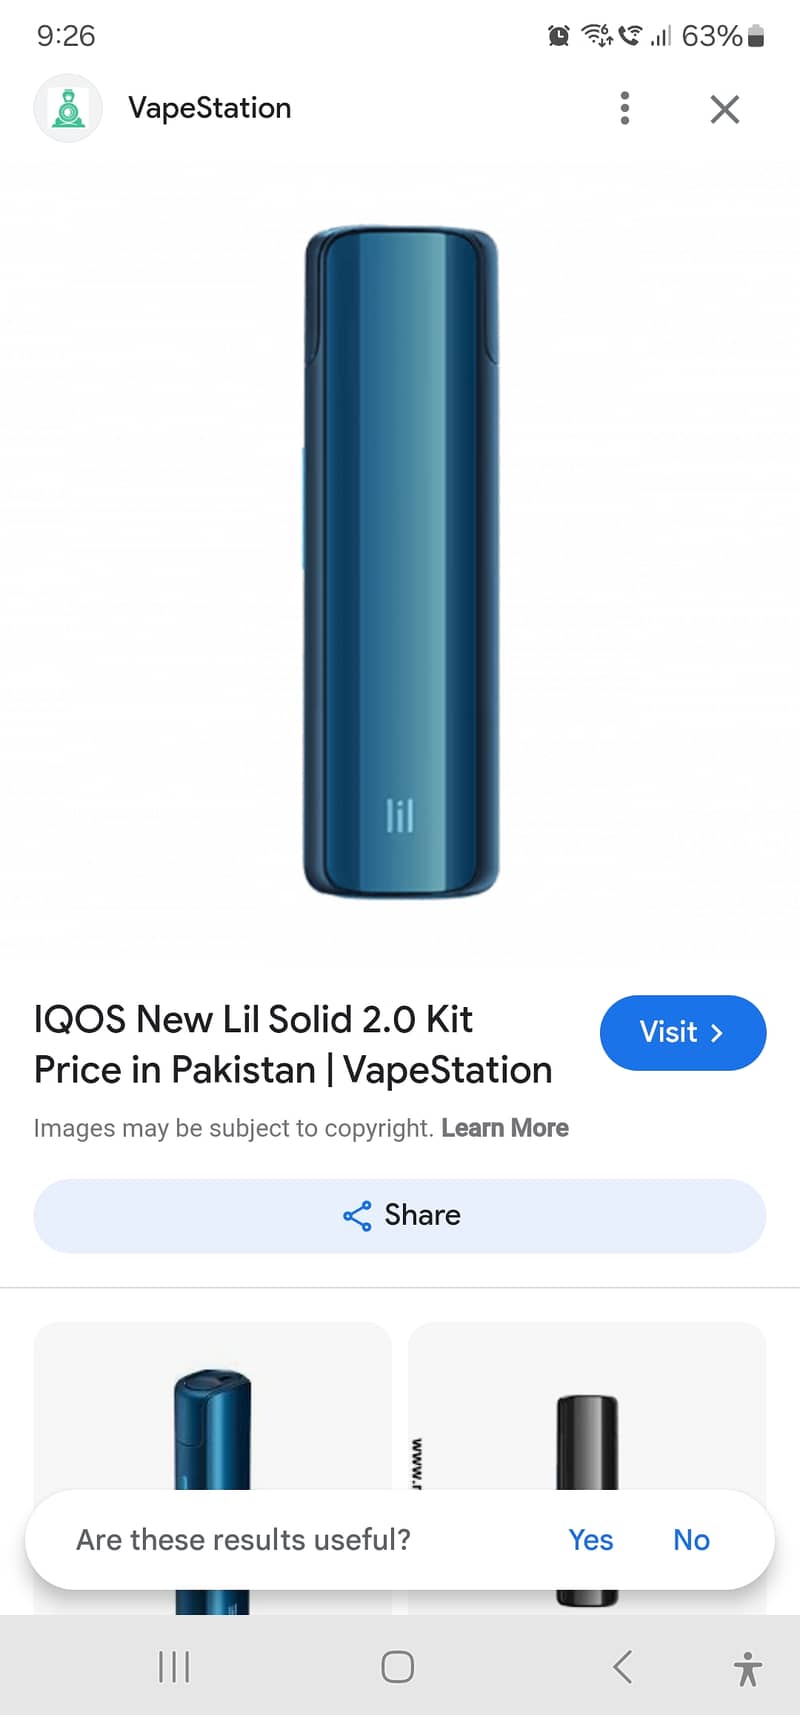 IQOS New Lil Solid 2.0 Tobacco Heating System 2